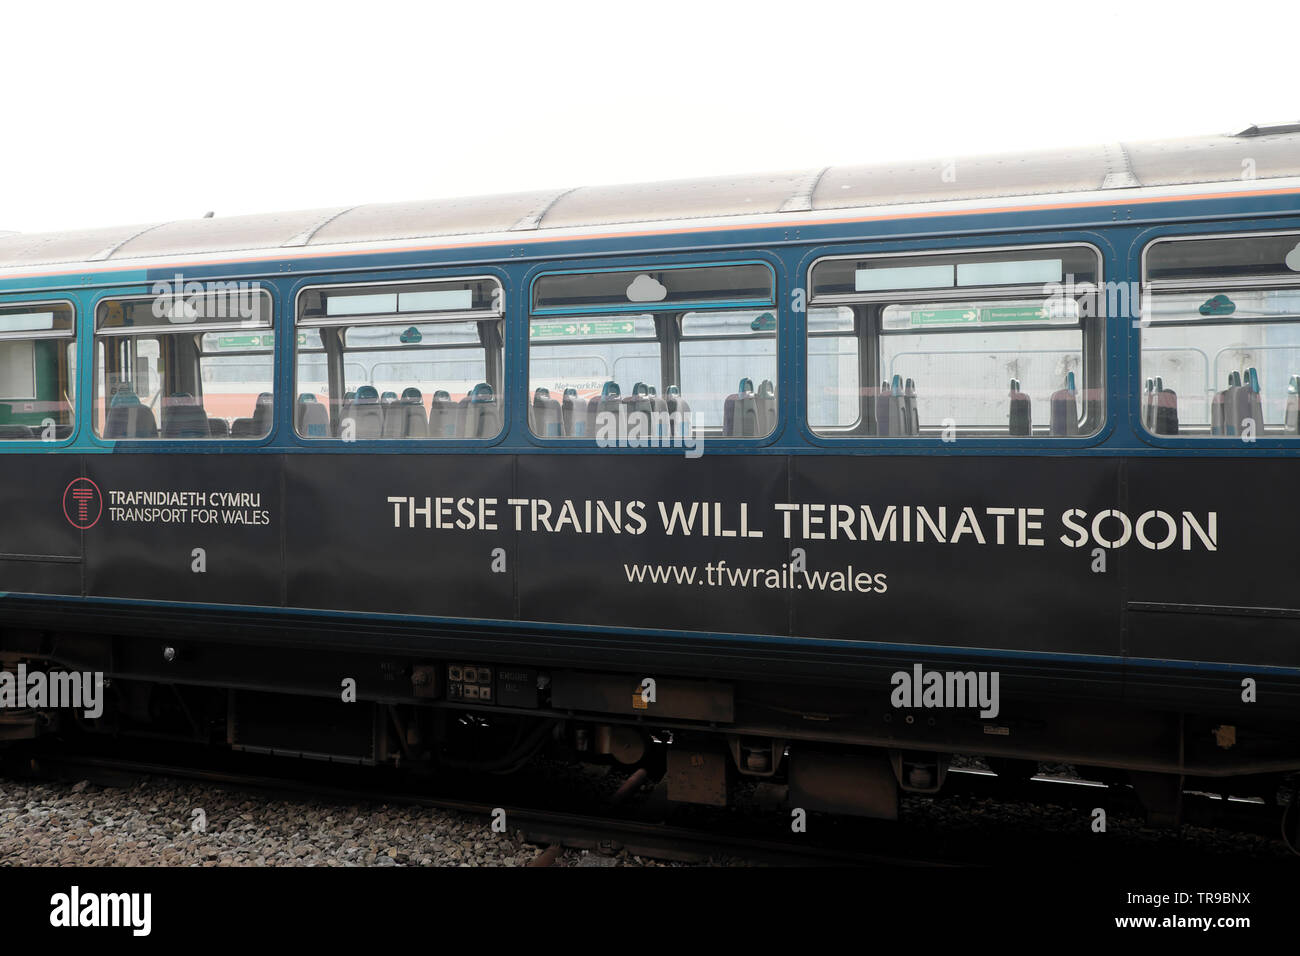 Transport for Wales side of train carriage text with notice 'These Trains Will Terminate Soon' sign in Cardiff Wales UK 2019  KATHY DEWITT Stock Photo